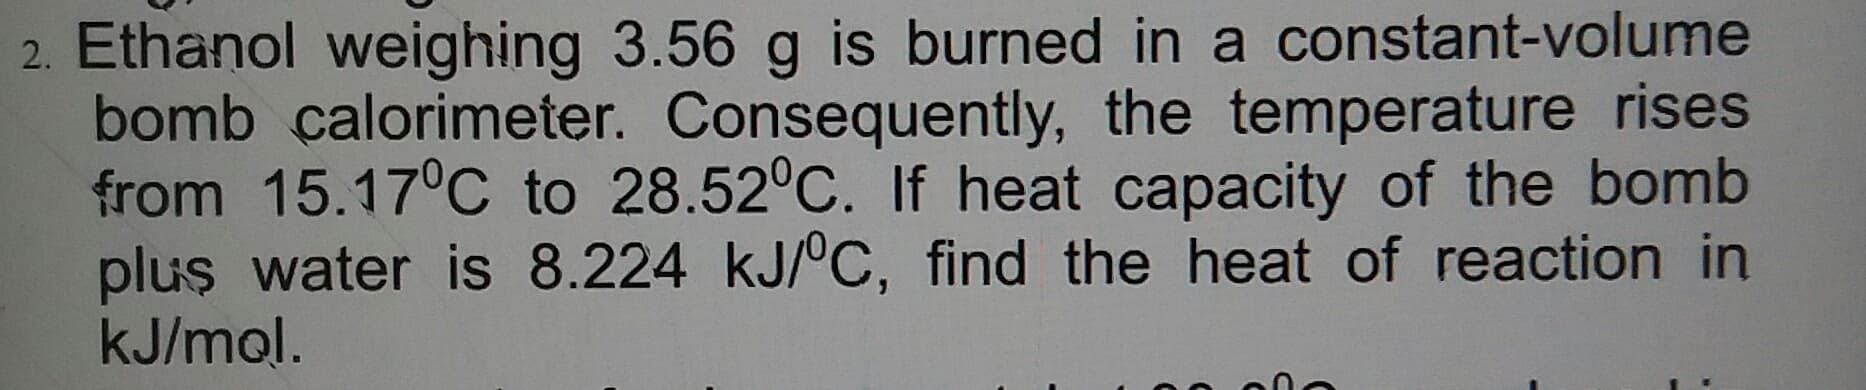 Ethanol weighing 3.56 g is burned in a constant-volume
bomb calorimeter. Consequently, the temperature rises
from 15.17°C to 28.52°C. If heat capacity of the bomb
plus water is 8.224 kJ/°C, find the heat of reaction in
kJ/mol.
